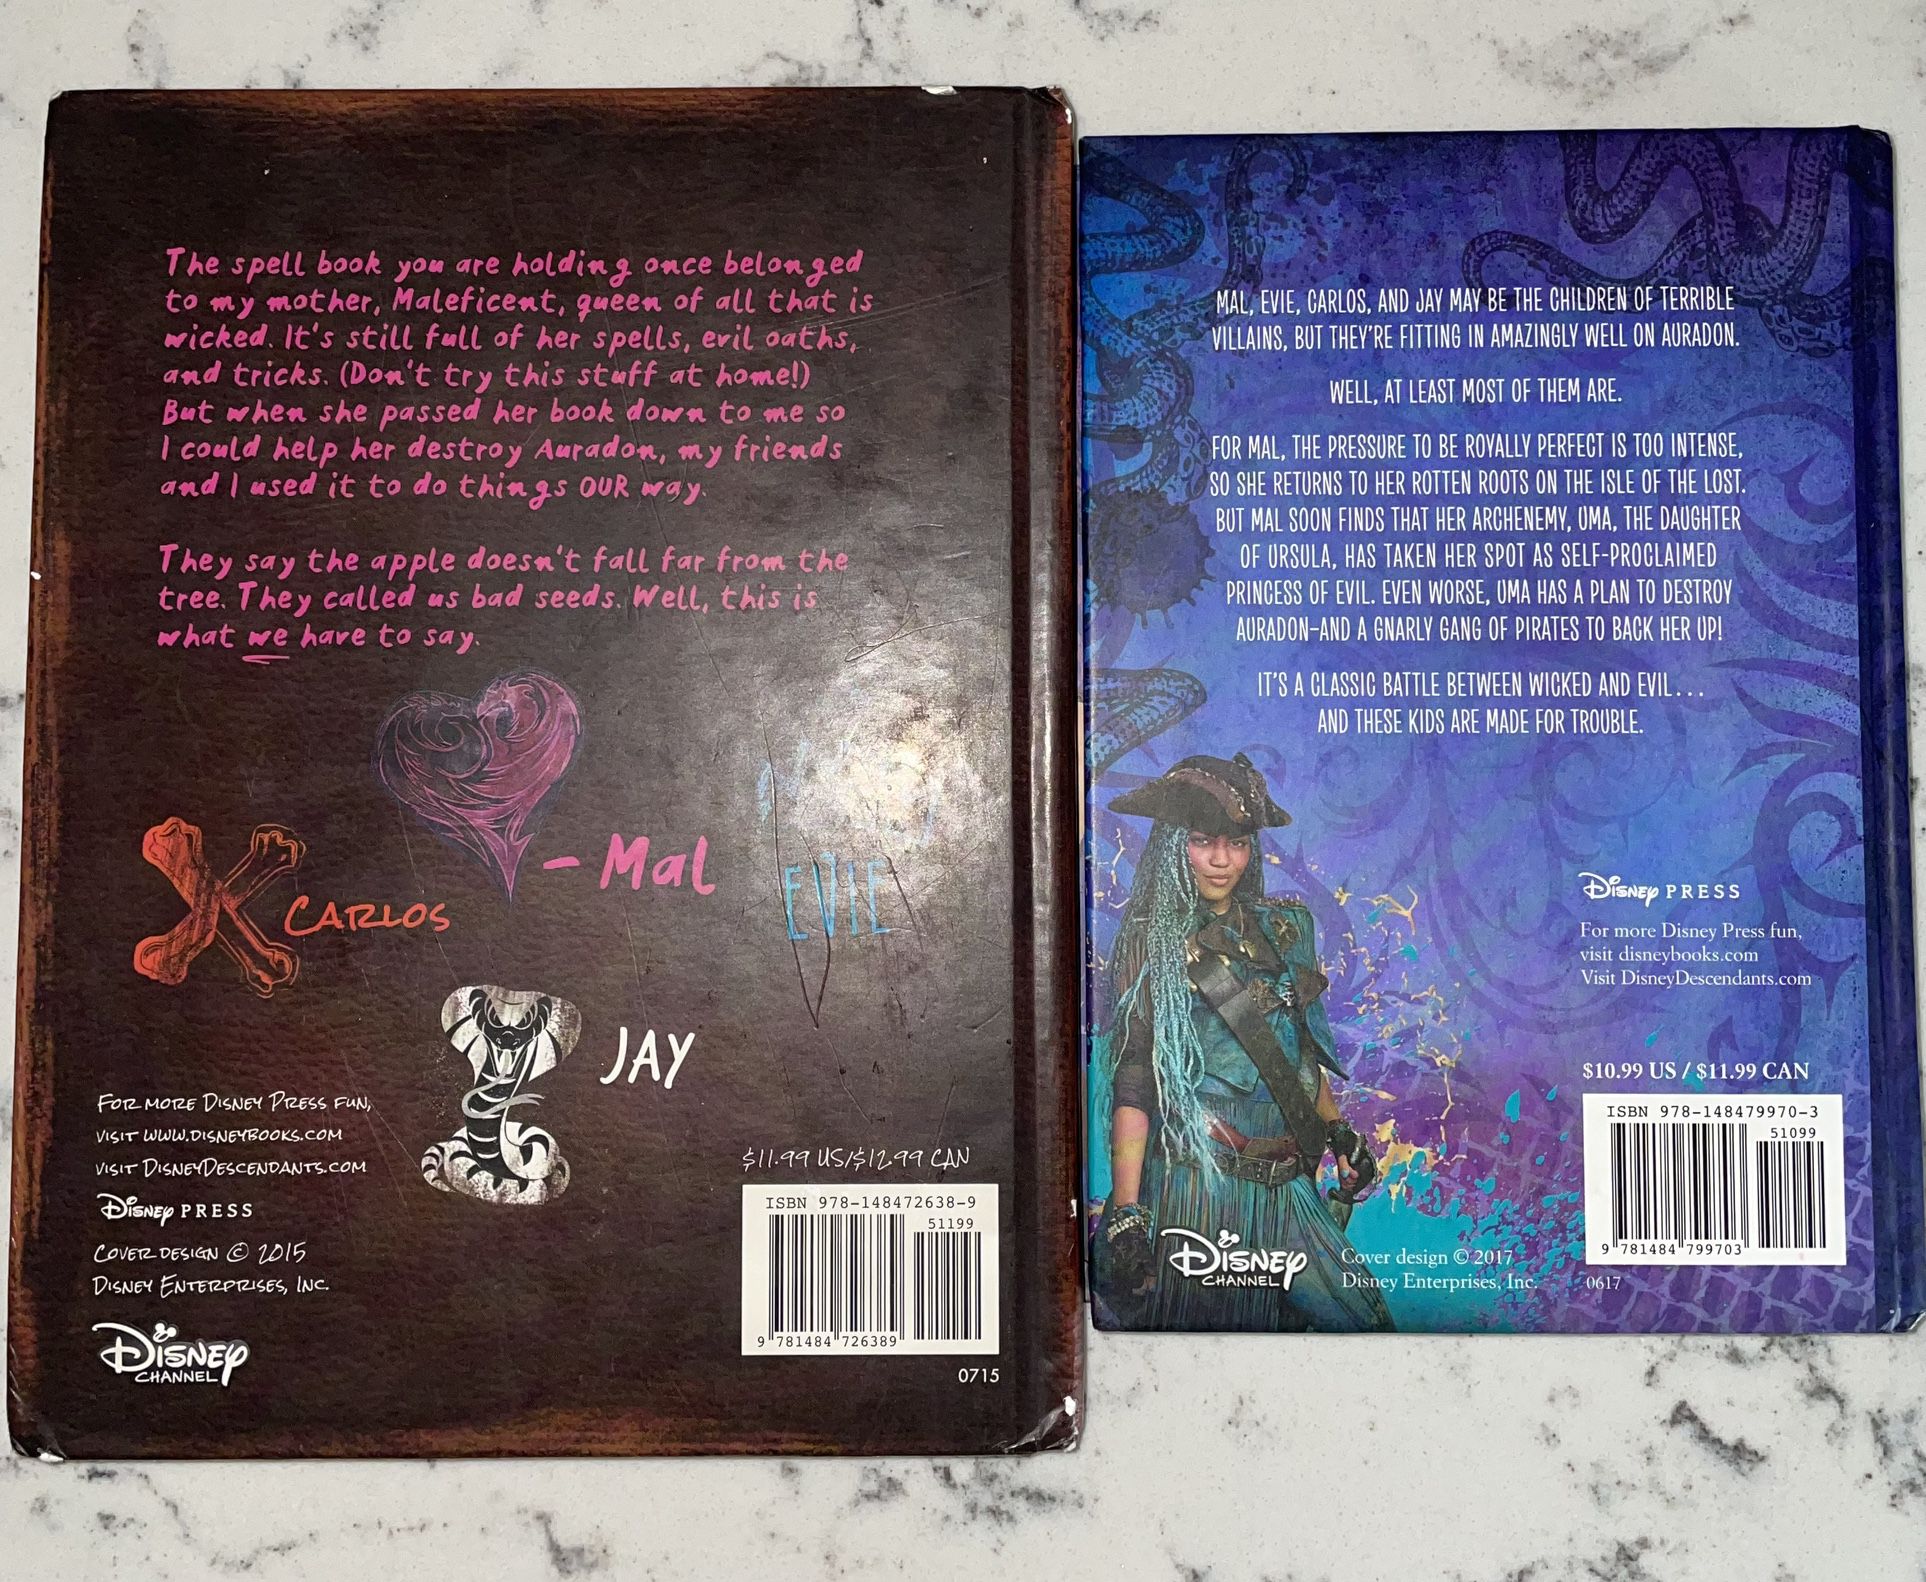 Disney Descendants 2 Book and Mal's Spell Book for Sale in San